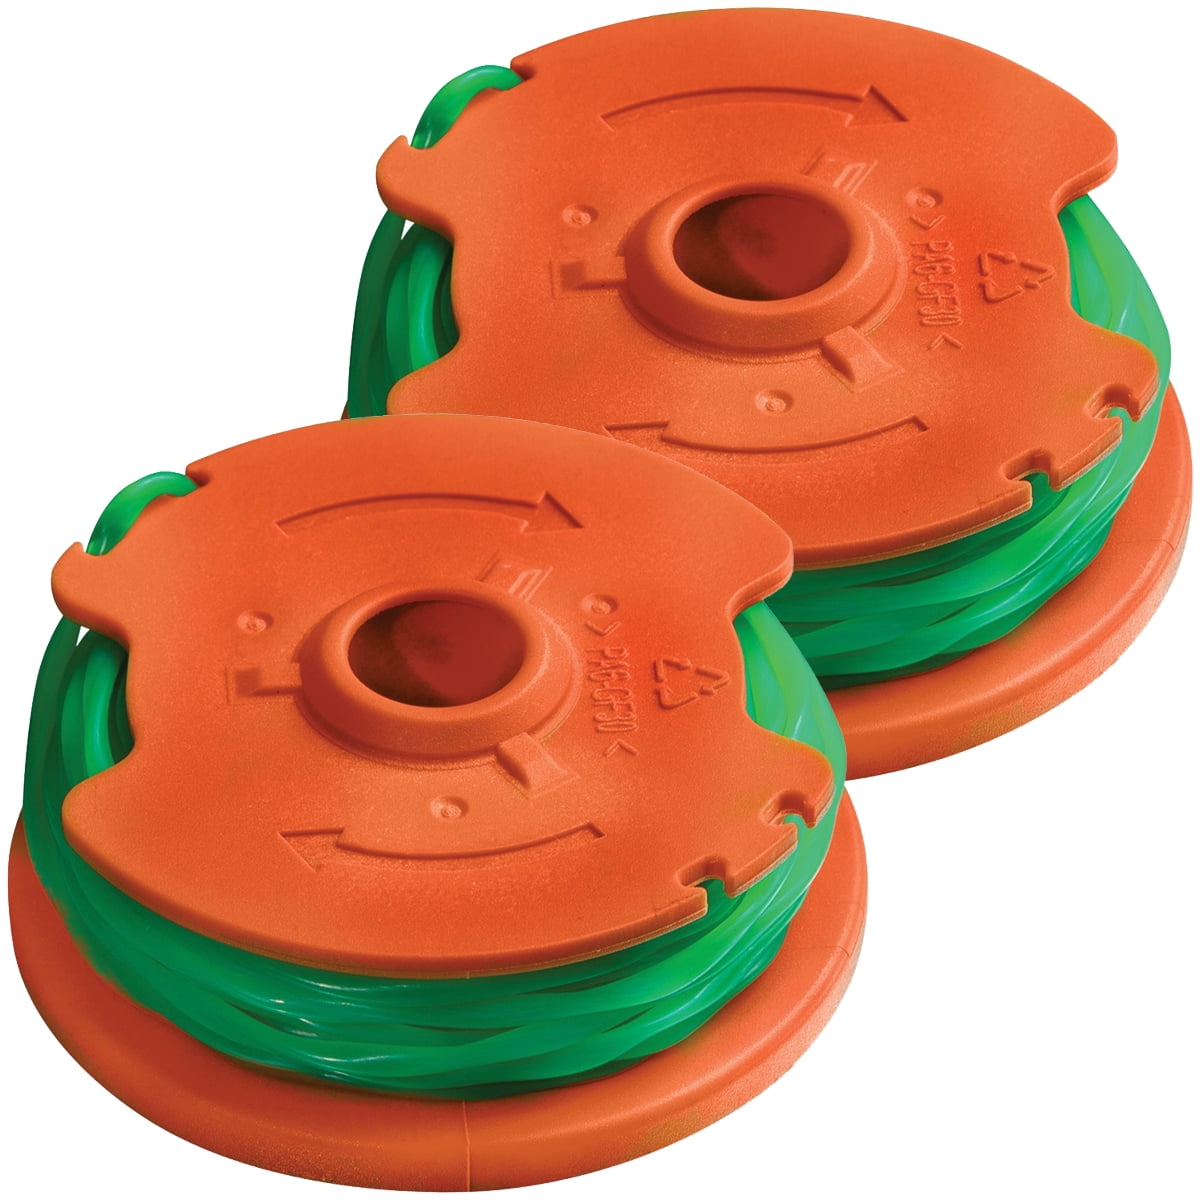 2xReplacement Grass Trimmer Spool Cap Cover For WA0037 WORX 40V&56V Trimmer 